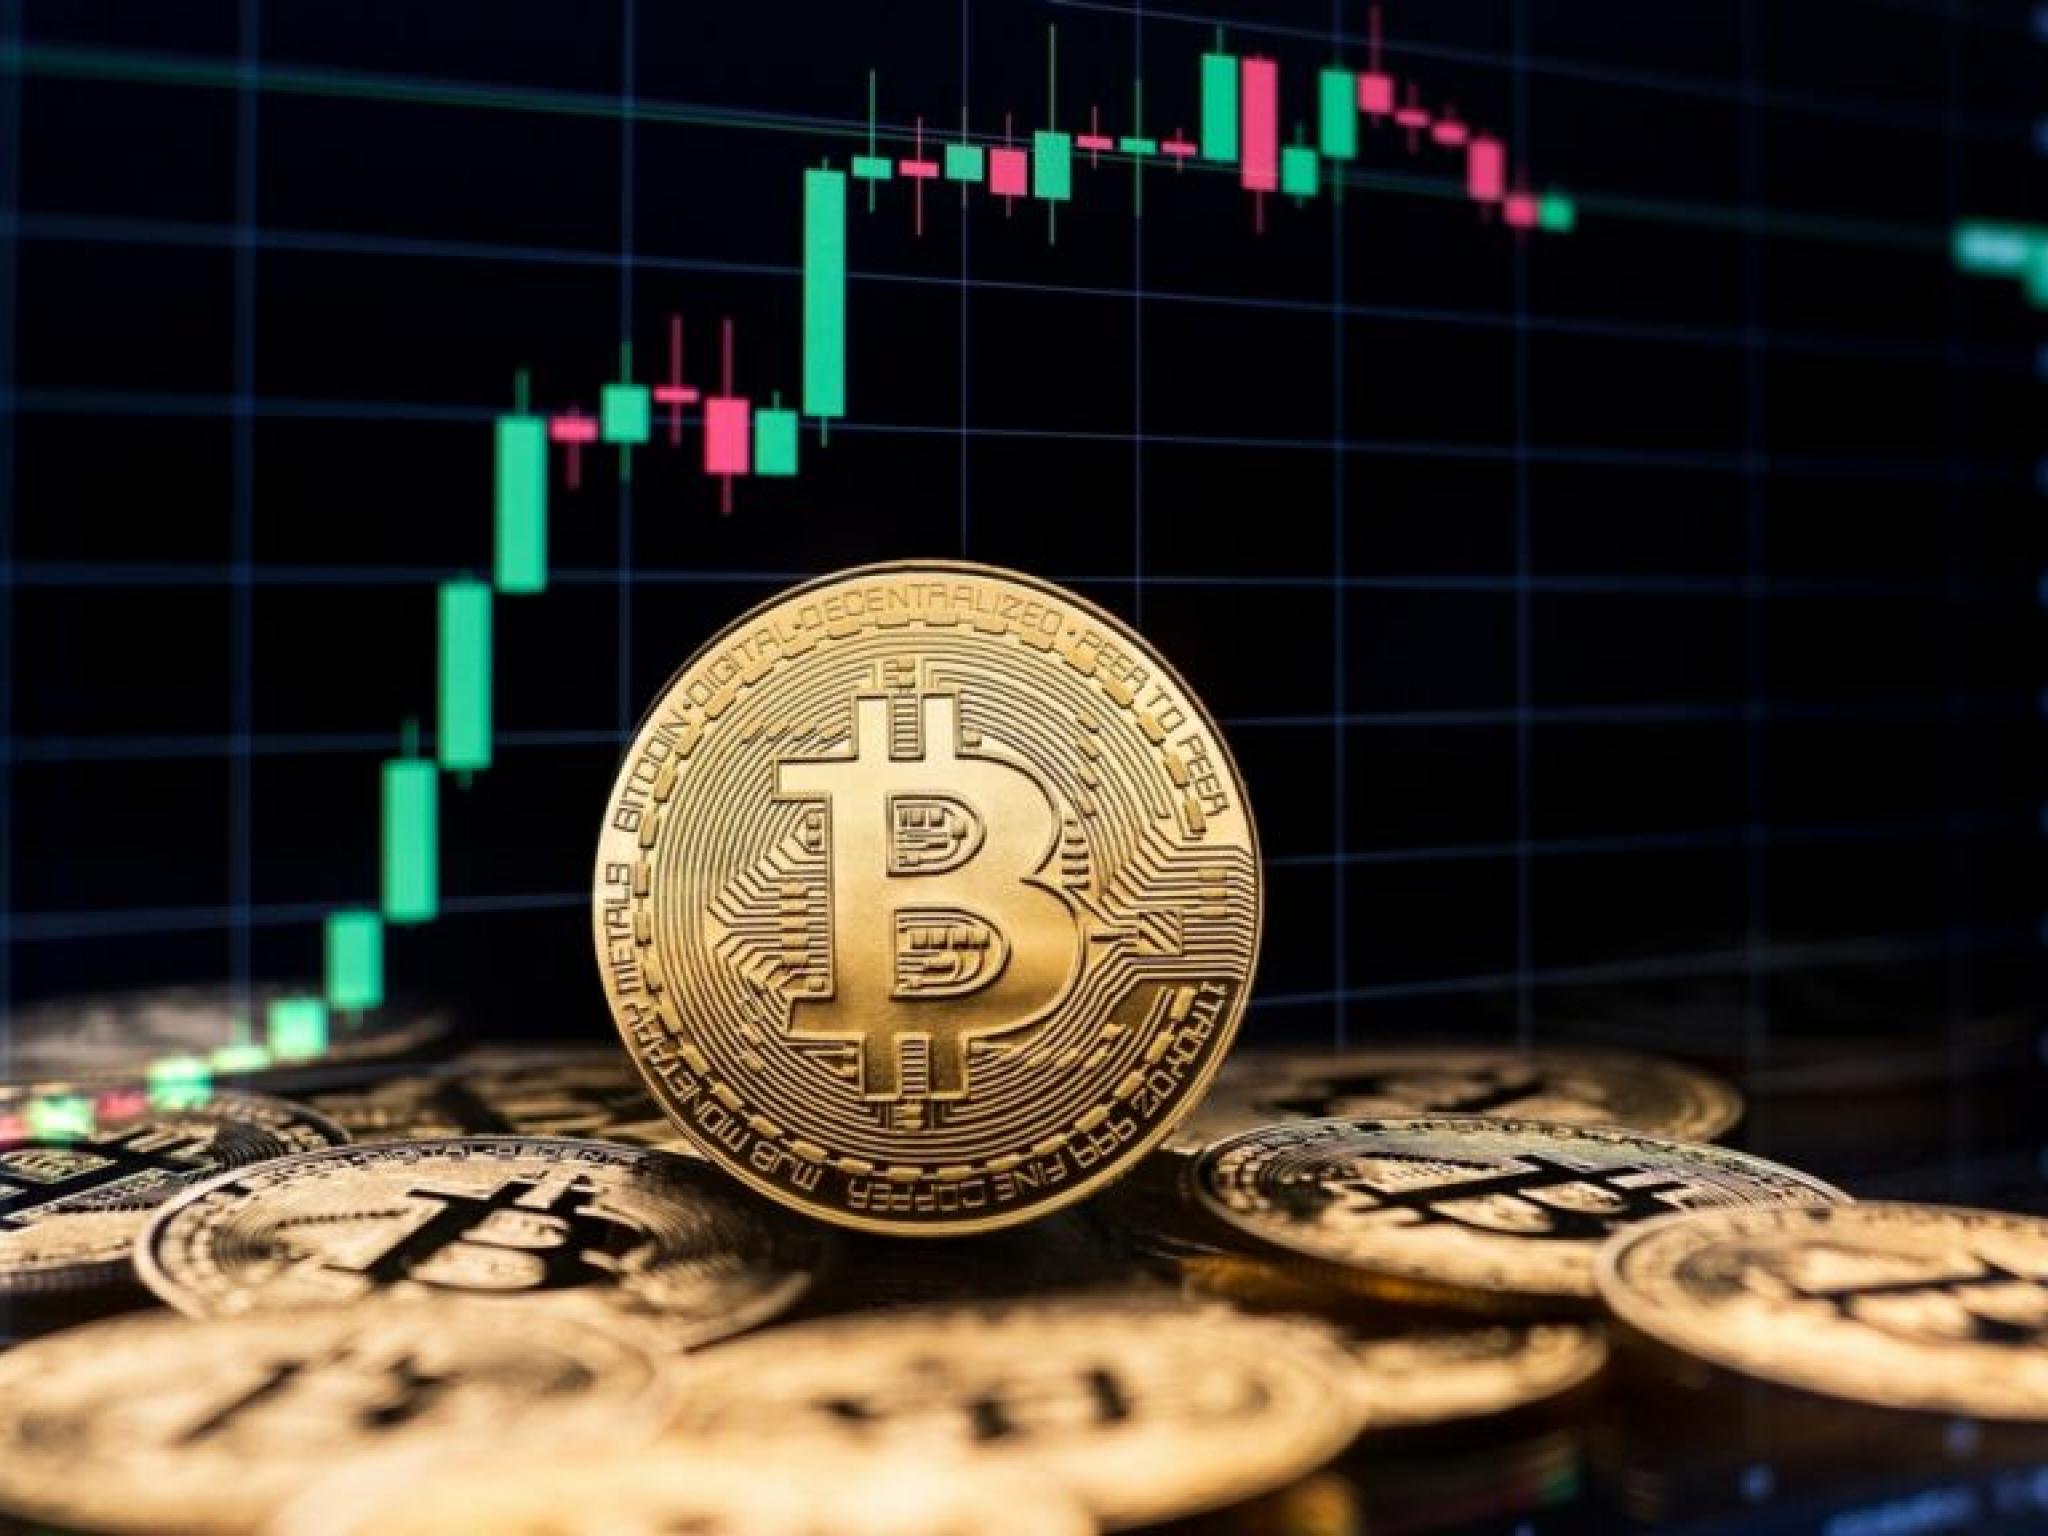  bitcoin-dip-not-over-yet-or-the-shorts-are-about-to-get-obliterated-says-ali-martinez 